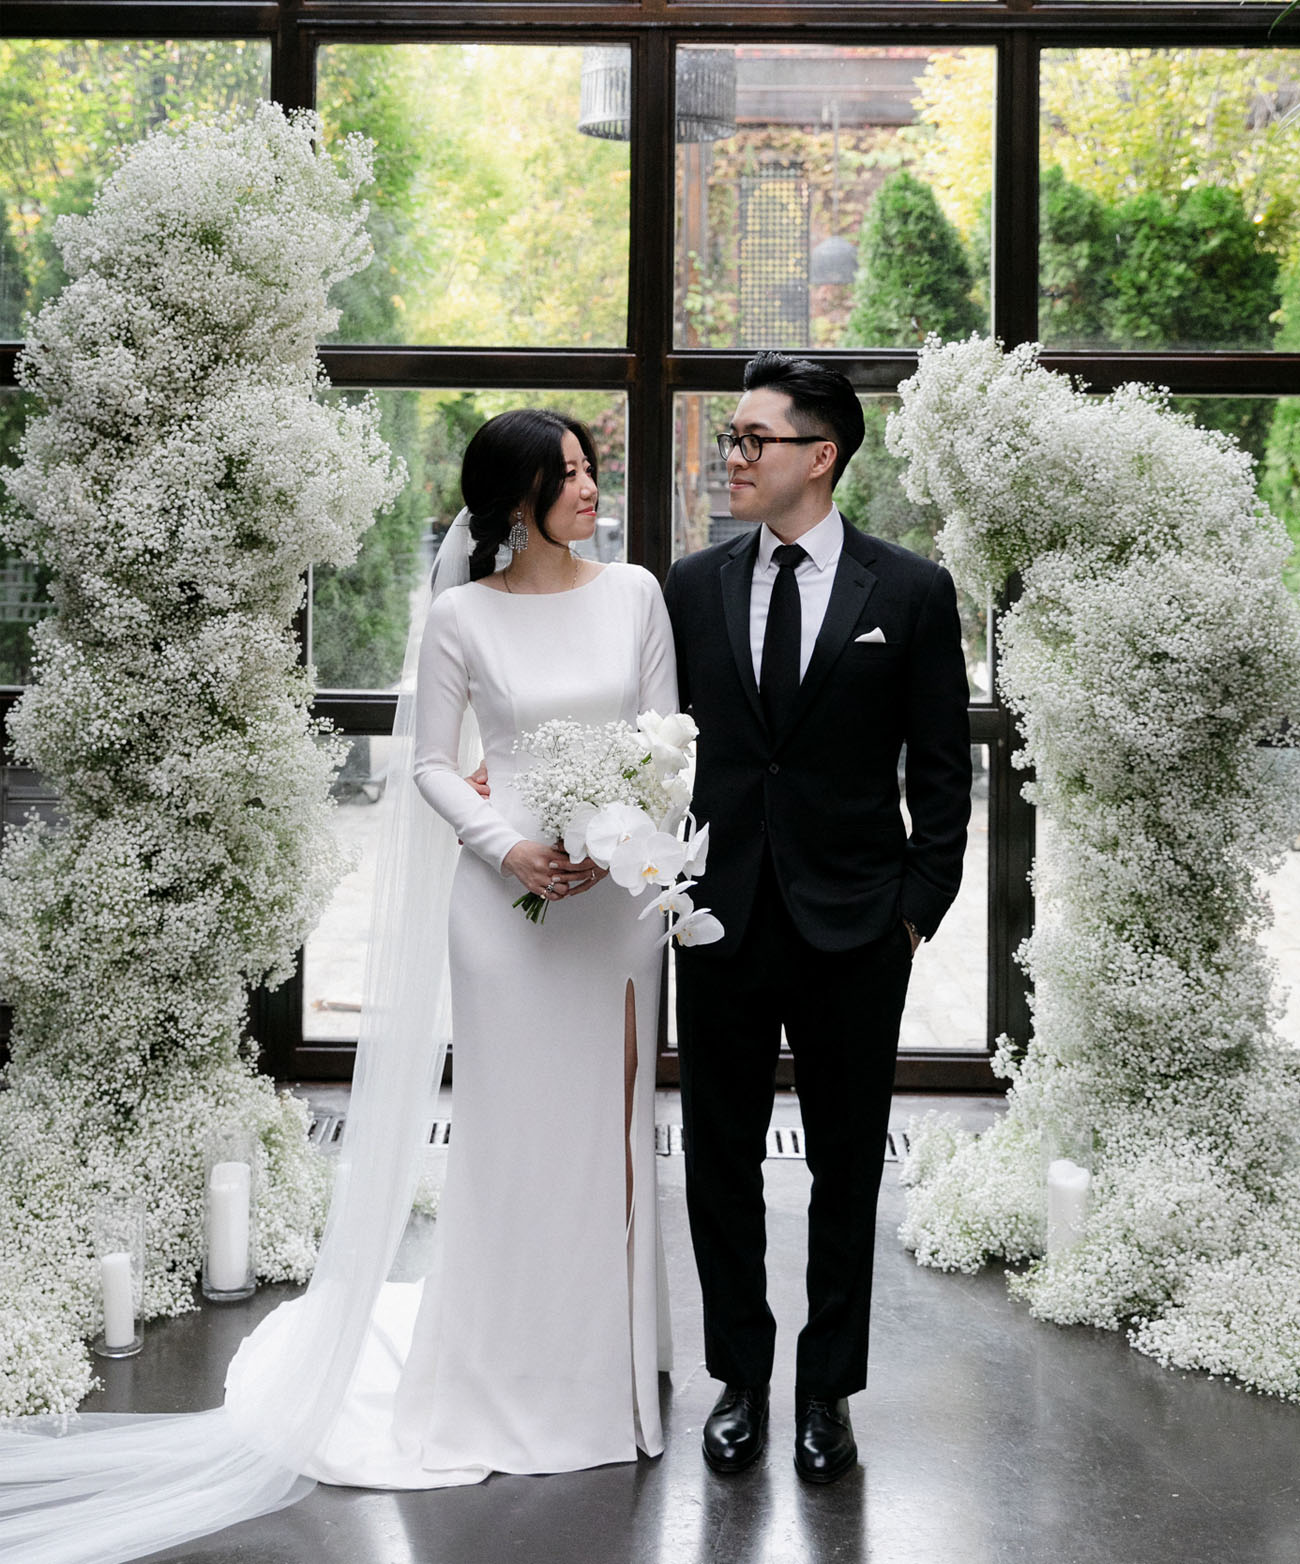 This couple went for a minimalist wedding in an industrial venue to show off their style